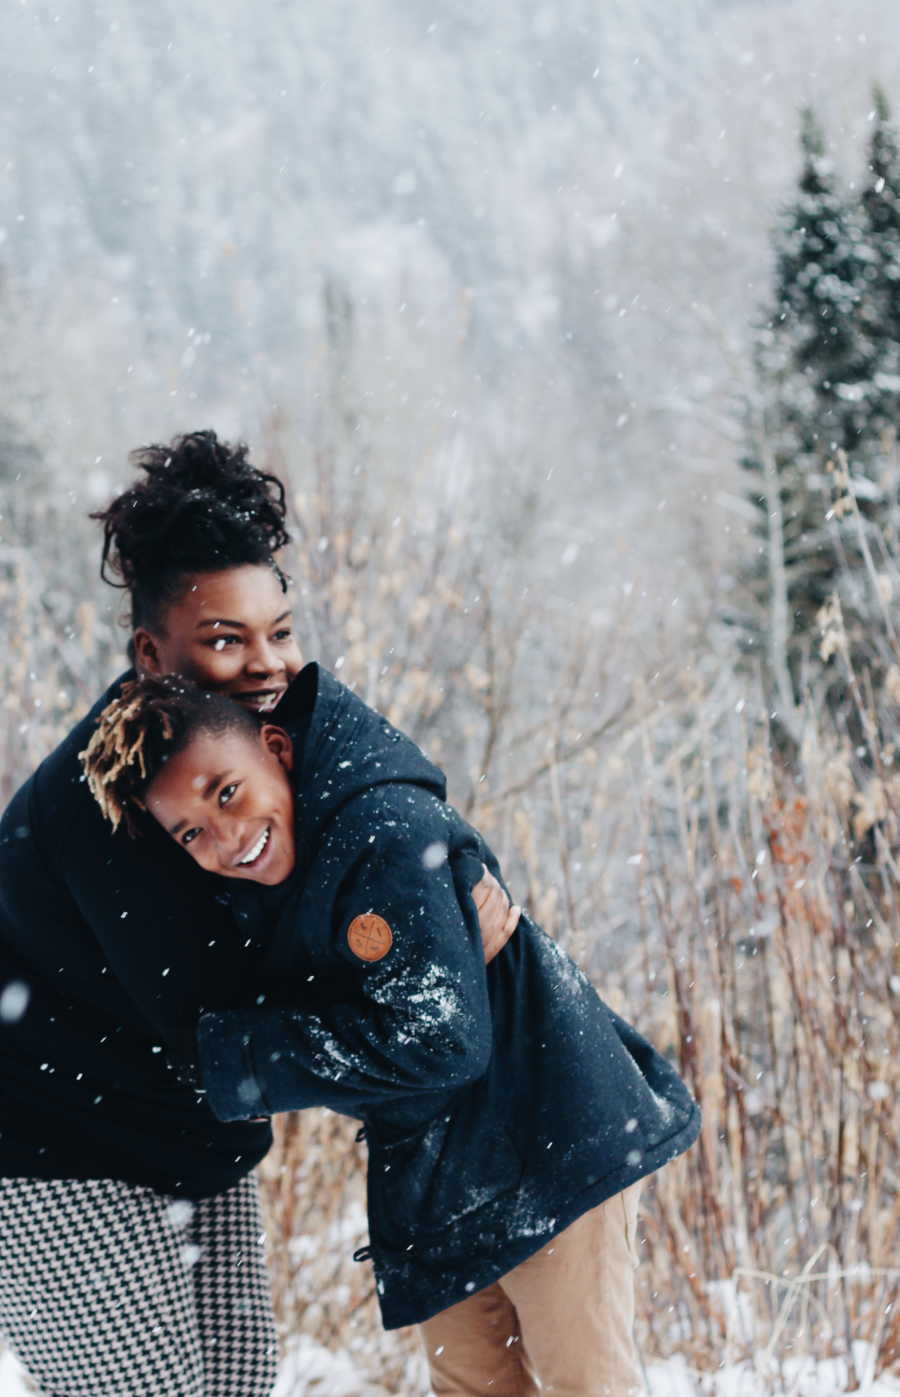 Birth mother stands outside in snowy weather hugging teen she gave up for adoption at birth